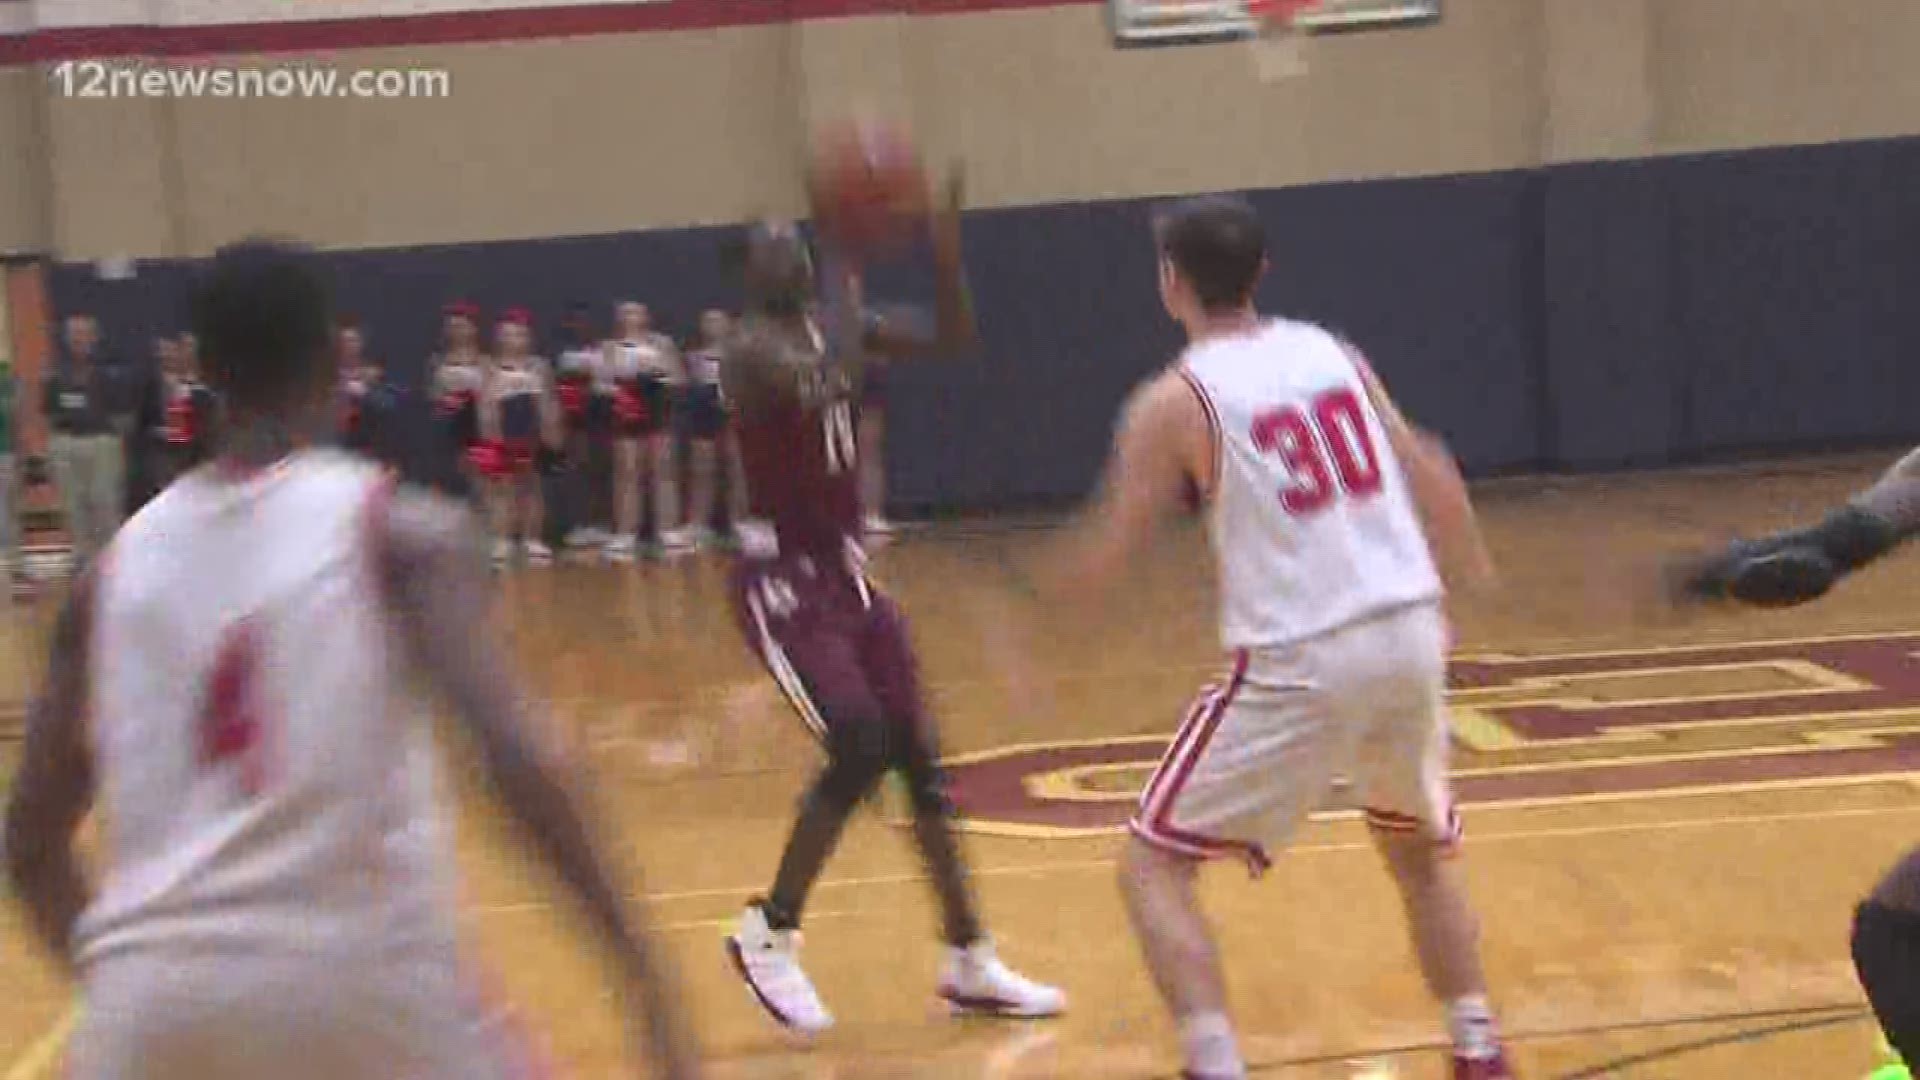 After leading 36-18 at halftime, Silsbee never took at step back and beat the Hawks by 25 points.